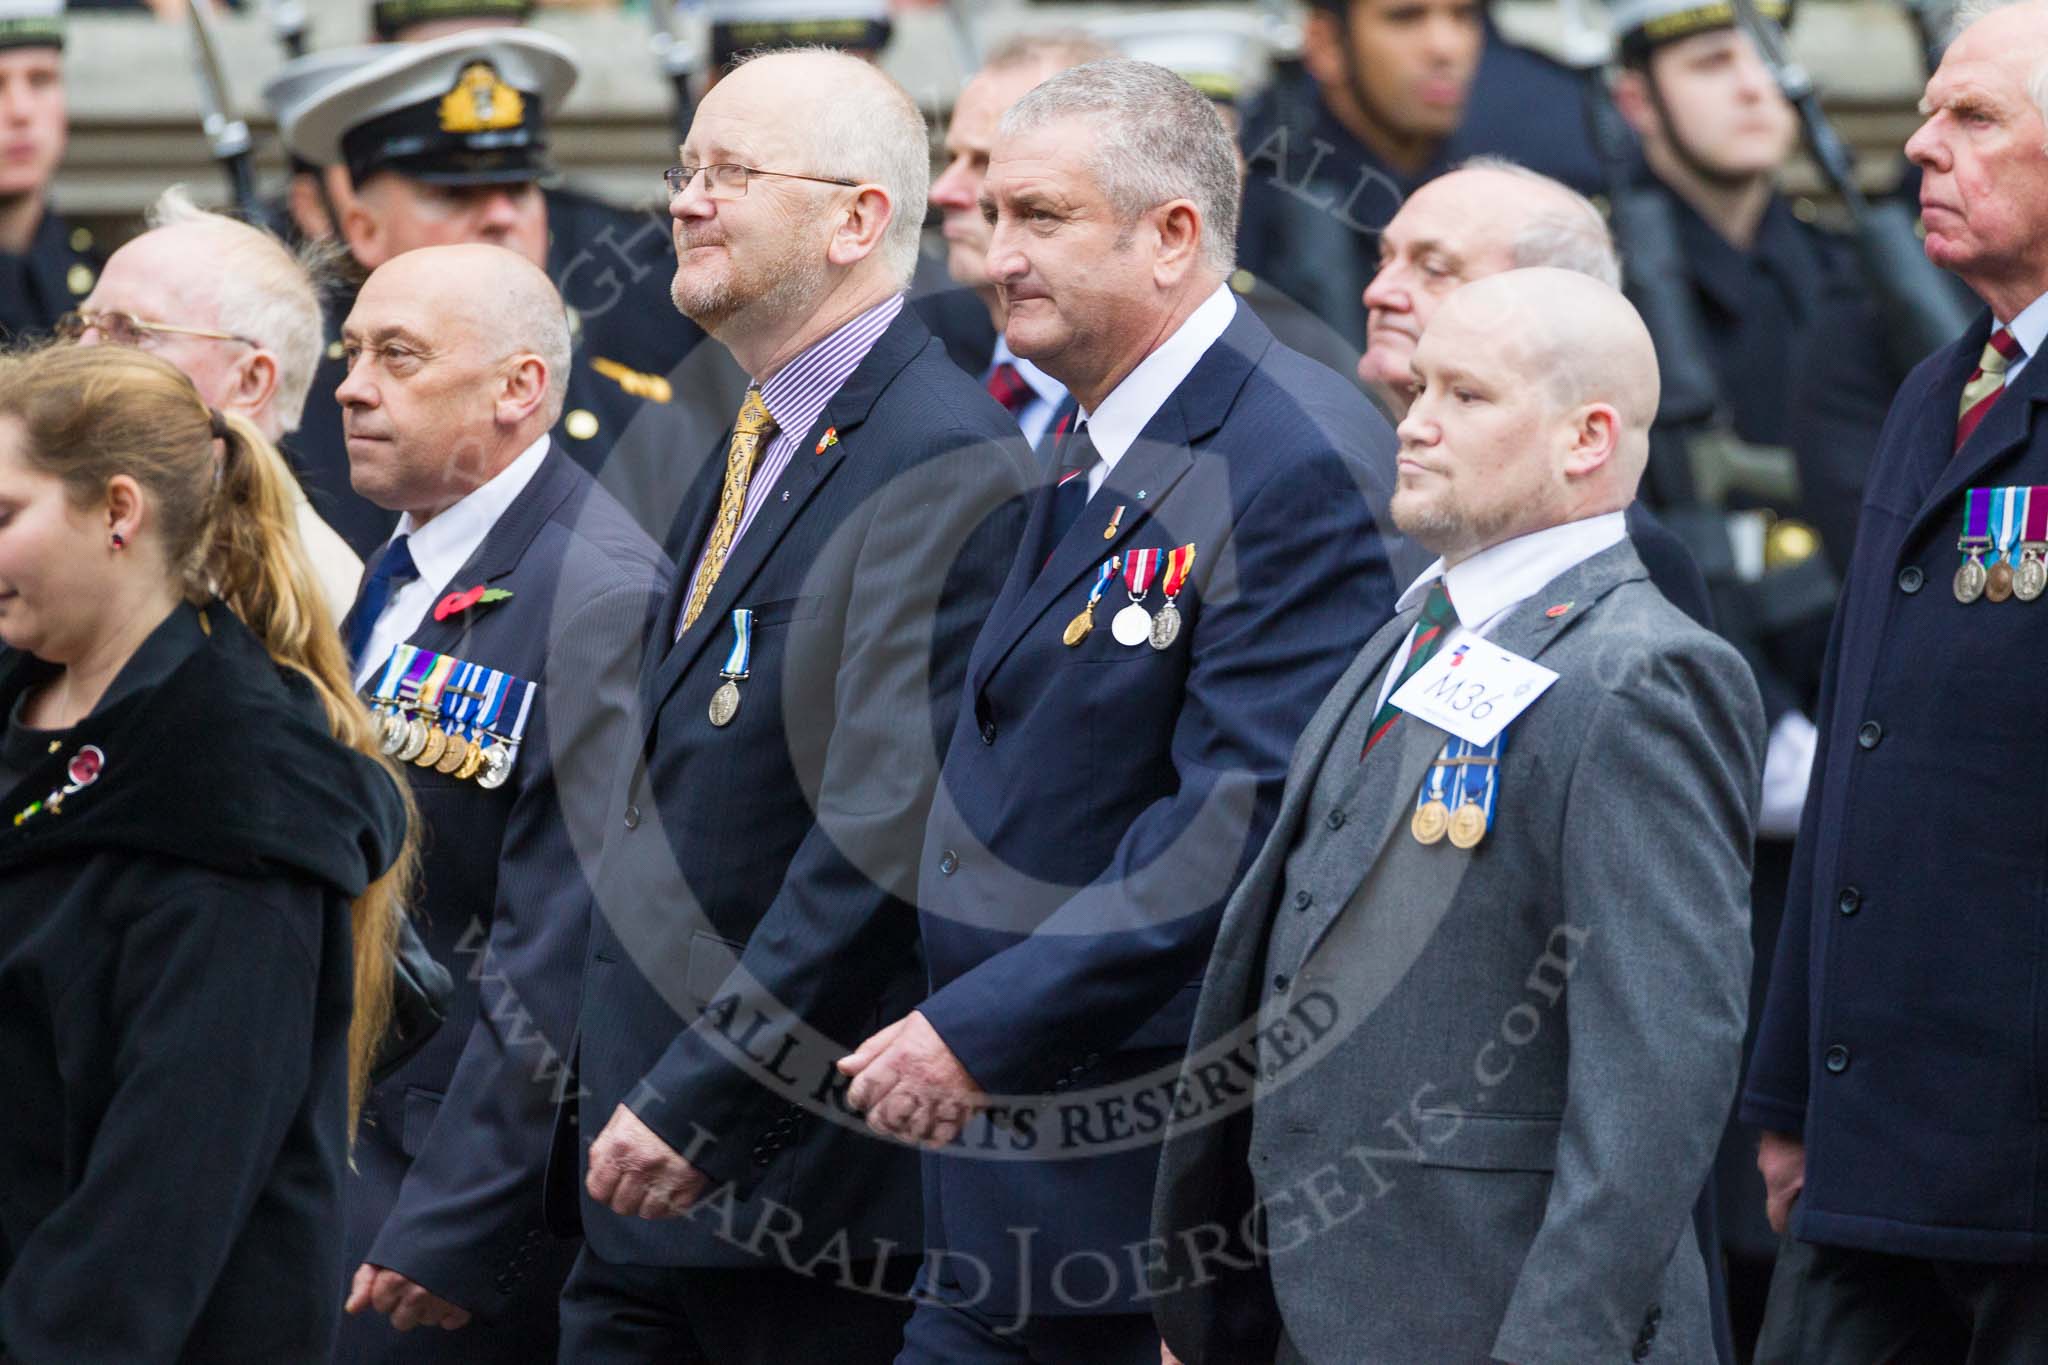 Remembrance Sunday at the Cenotaph 2015: Group M36, Union Jack Club.
Cenotaph, Whitehall, London SW1,
London,
Greater London,
United Kingdom,
on 08 November 2015 at 12:18, image #1648